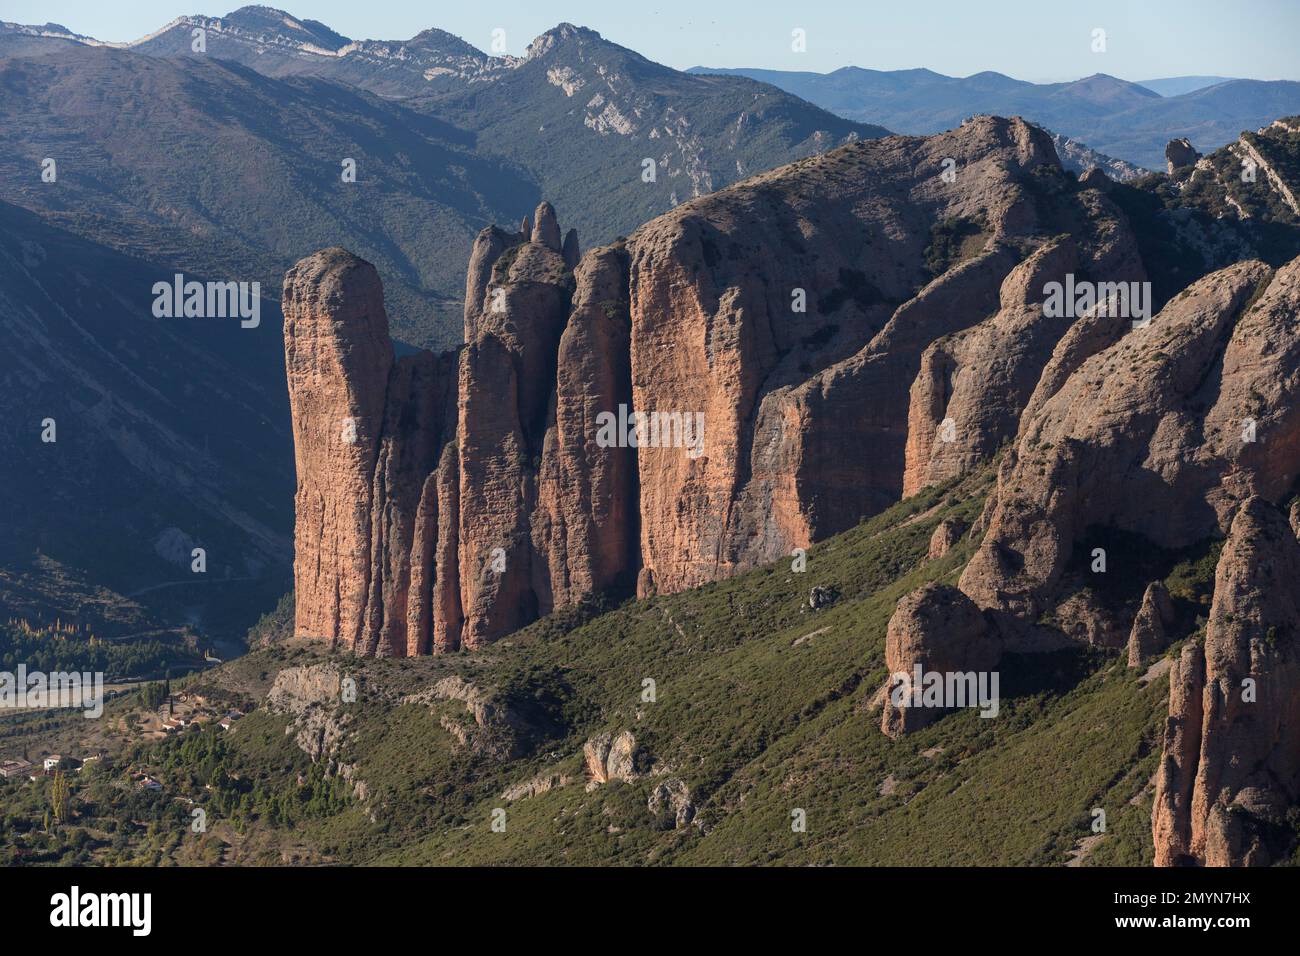 Los Mallos de Riglos, conglomerate rocks, height of the rocks 300m, paradise for climbers, province of Huesca, Aragon, southern edge of the Pyrenees, Stock Photo